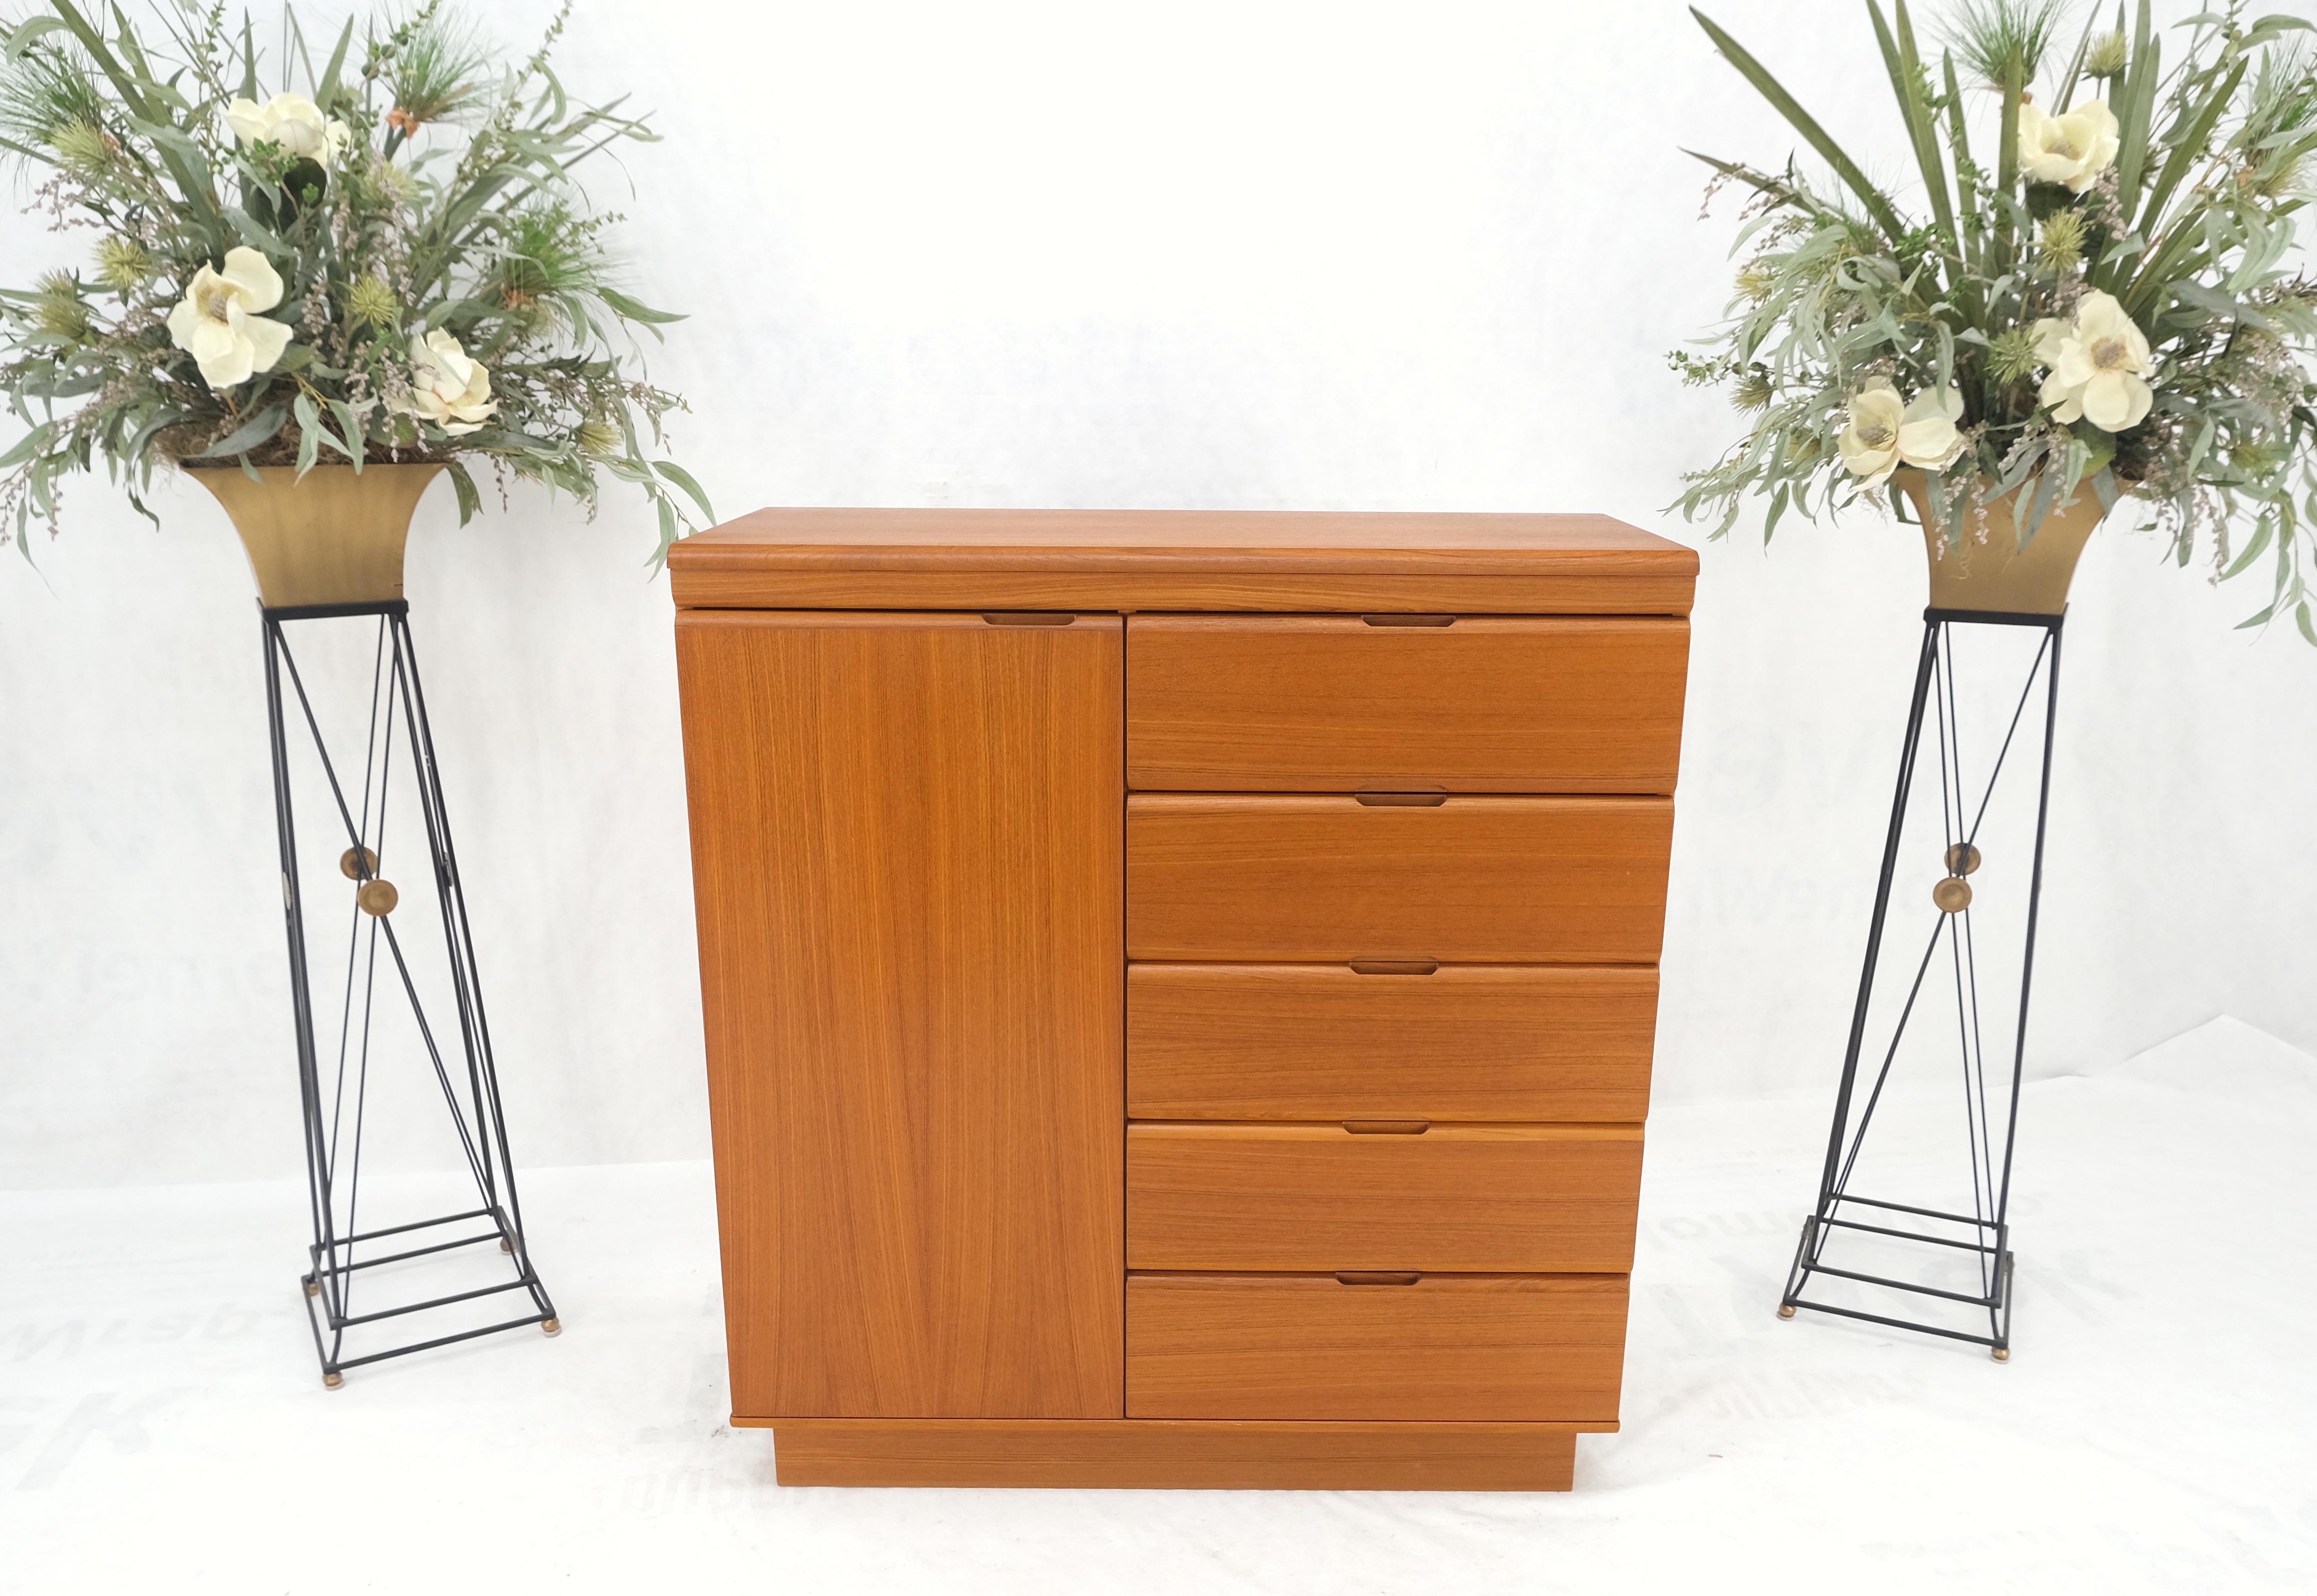 Lacquered Danish Mid-Century Modern 7 Drawers High Credenza Chest Dresser Chifforobe Mint! For Sale